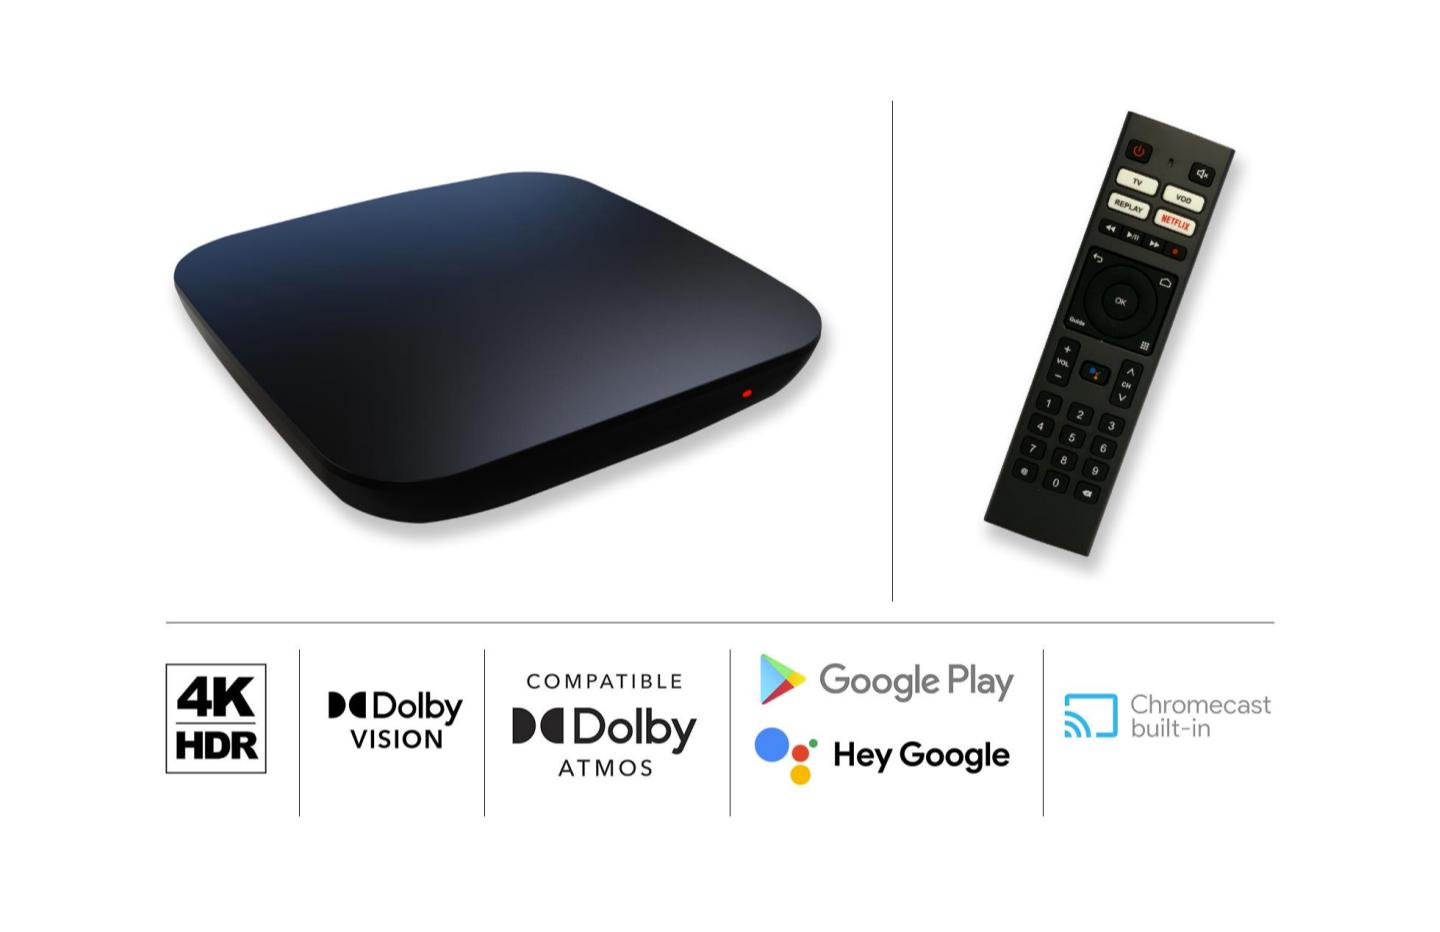 Red By Sfr Reinvents Its Fiber Offer With A New Android Tv Box Gamesdone